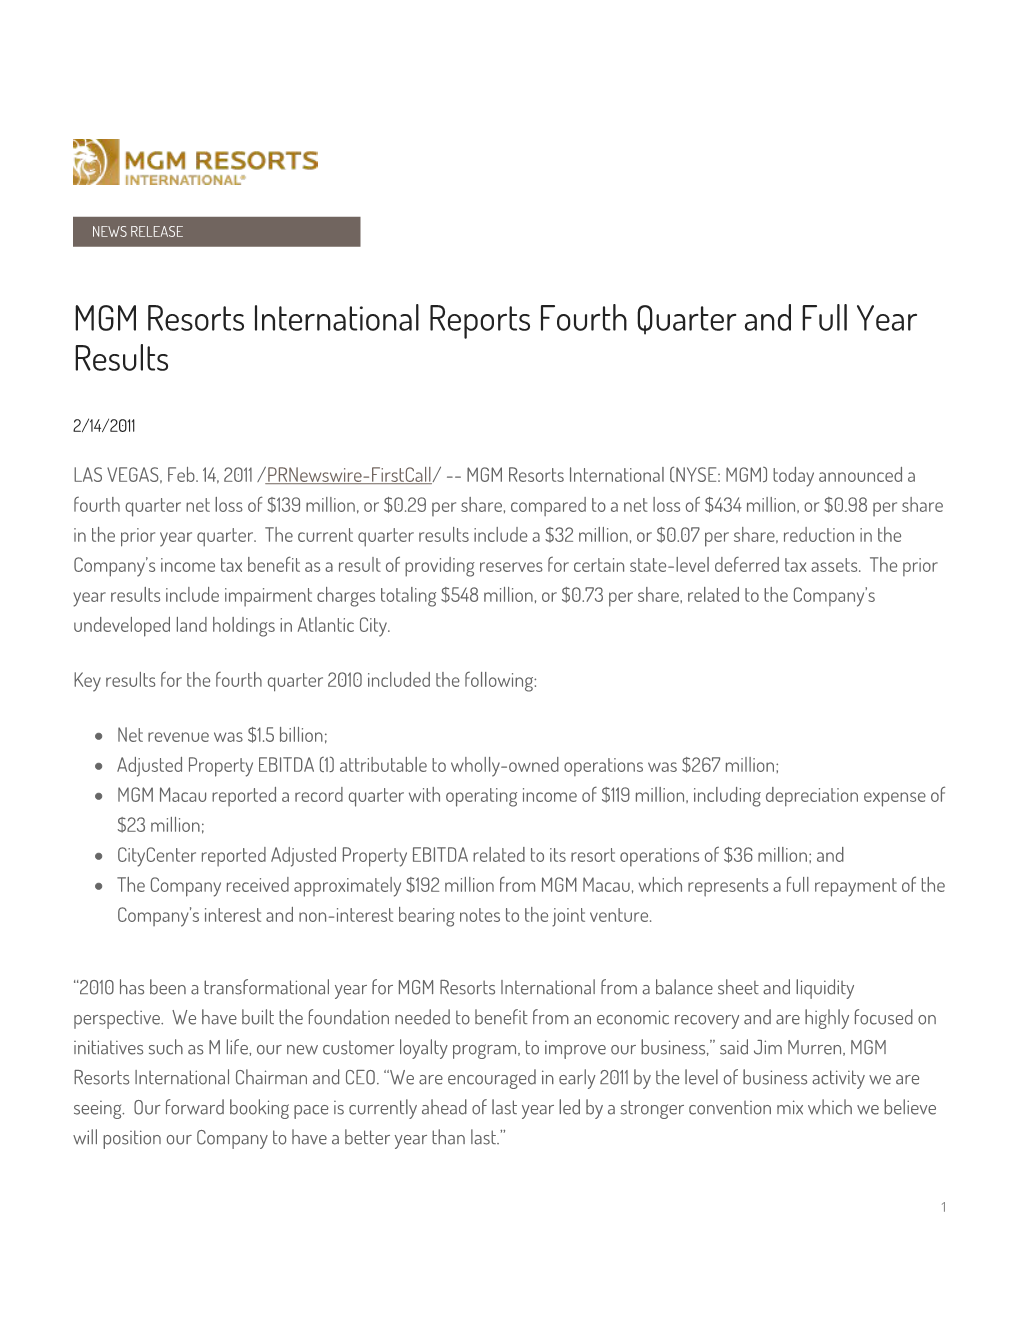 MGM Resorts International Reports Fourth Quarter and Full Year Results